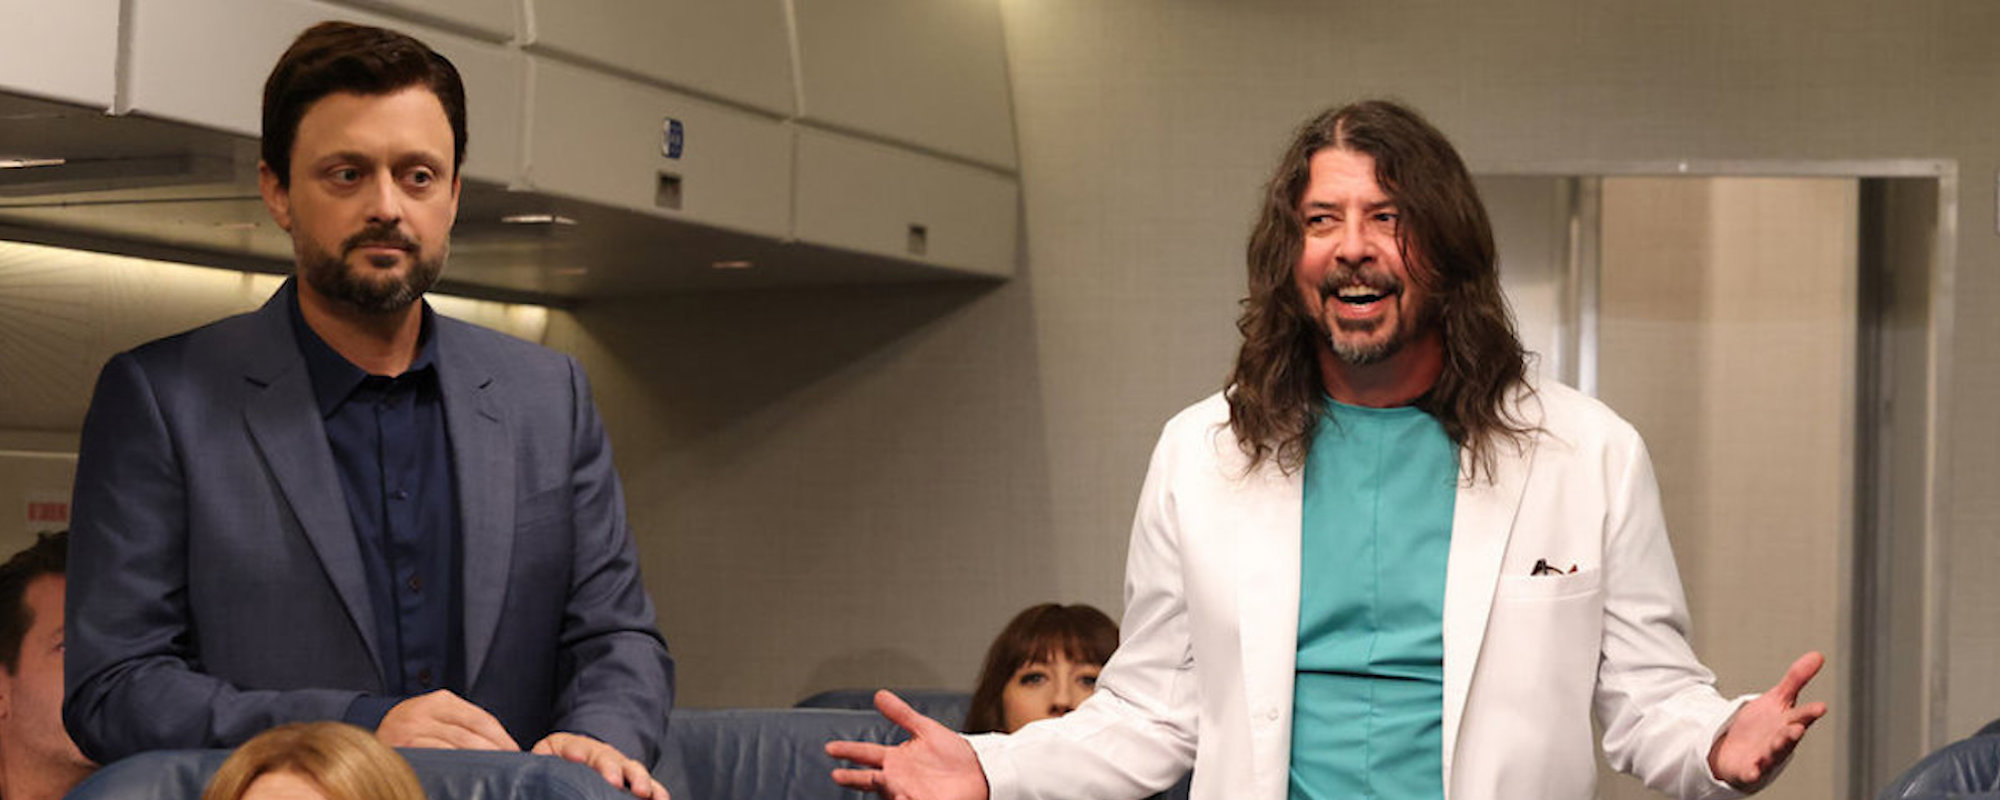 Watch: Foo Fighters Return for Ninth Run on ‘Saturday Night Live’ with H.E.R., Intro by Christopher Walken